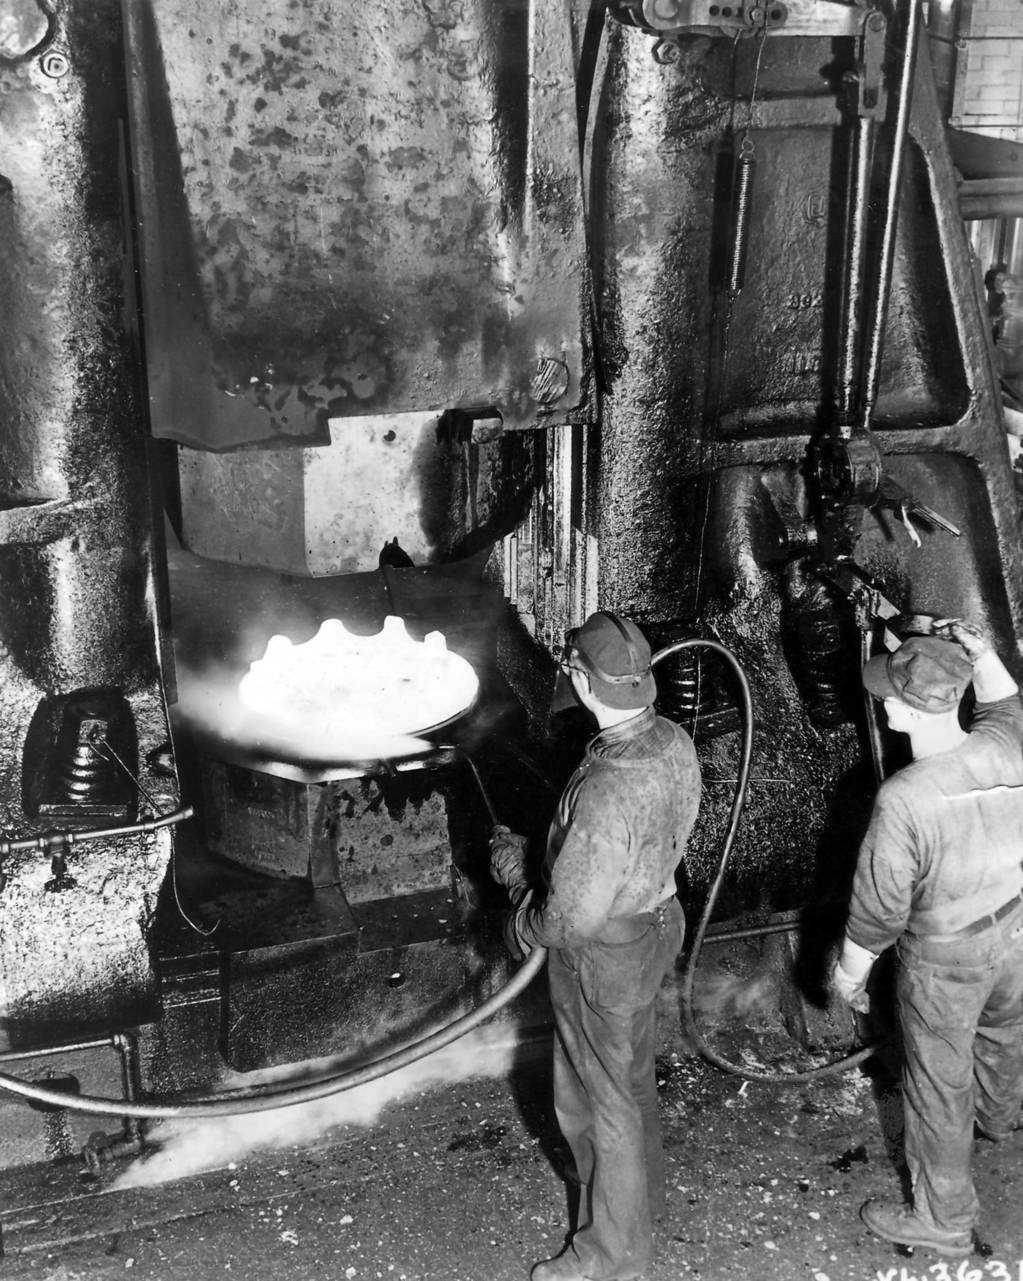 Hammers, striking a blow of 56,000 tons, are being used at Chrysler Corporations Dodge Chicago Aircraft Engine Plant to forge crankcase sections for the huge B-29 engines on Oct. 20, 1944. Shown above is the bottom part of a forge hammer forming one of these crankcases. Expert workmen control the force by a small foot pedal. The crankcases are then assembled into an 18 cylinder, 2200 horsepower, Wright air-cooled radial engine.